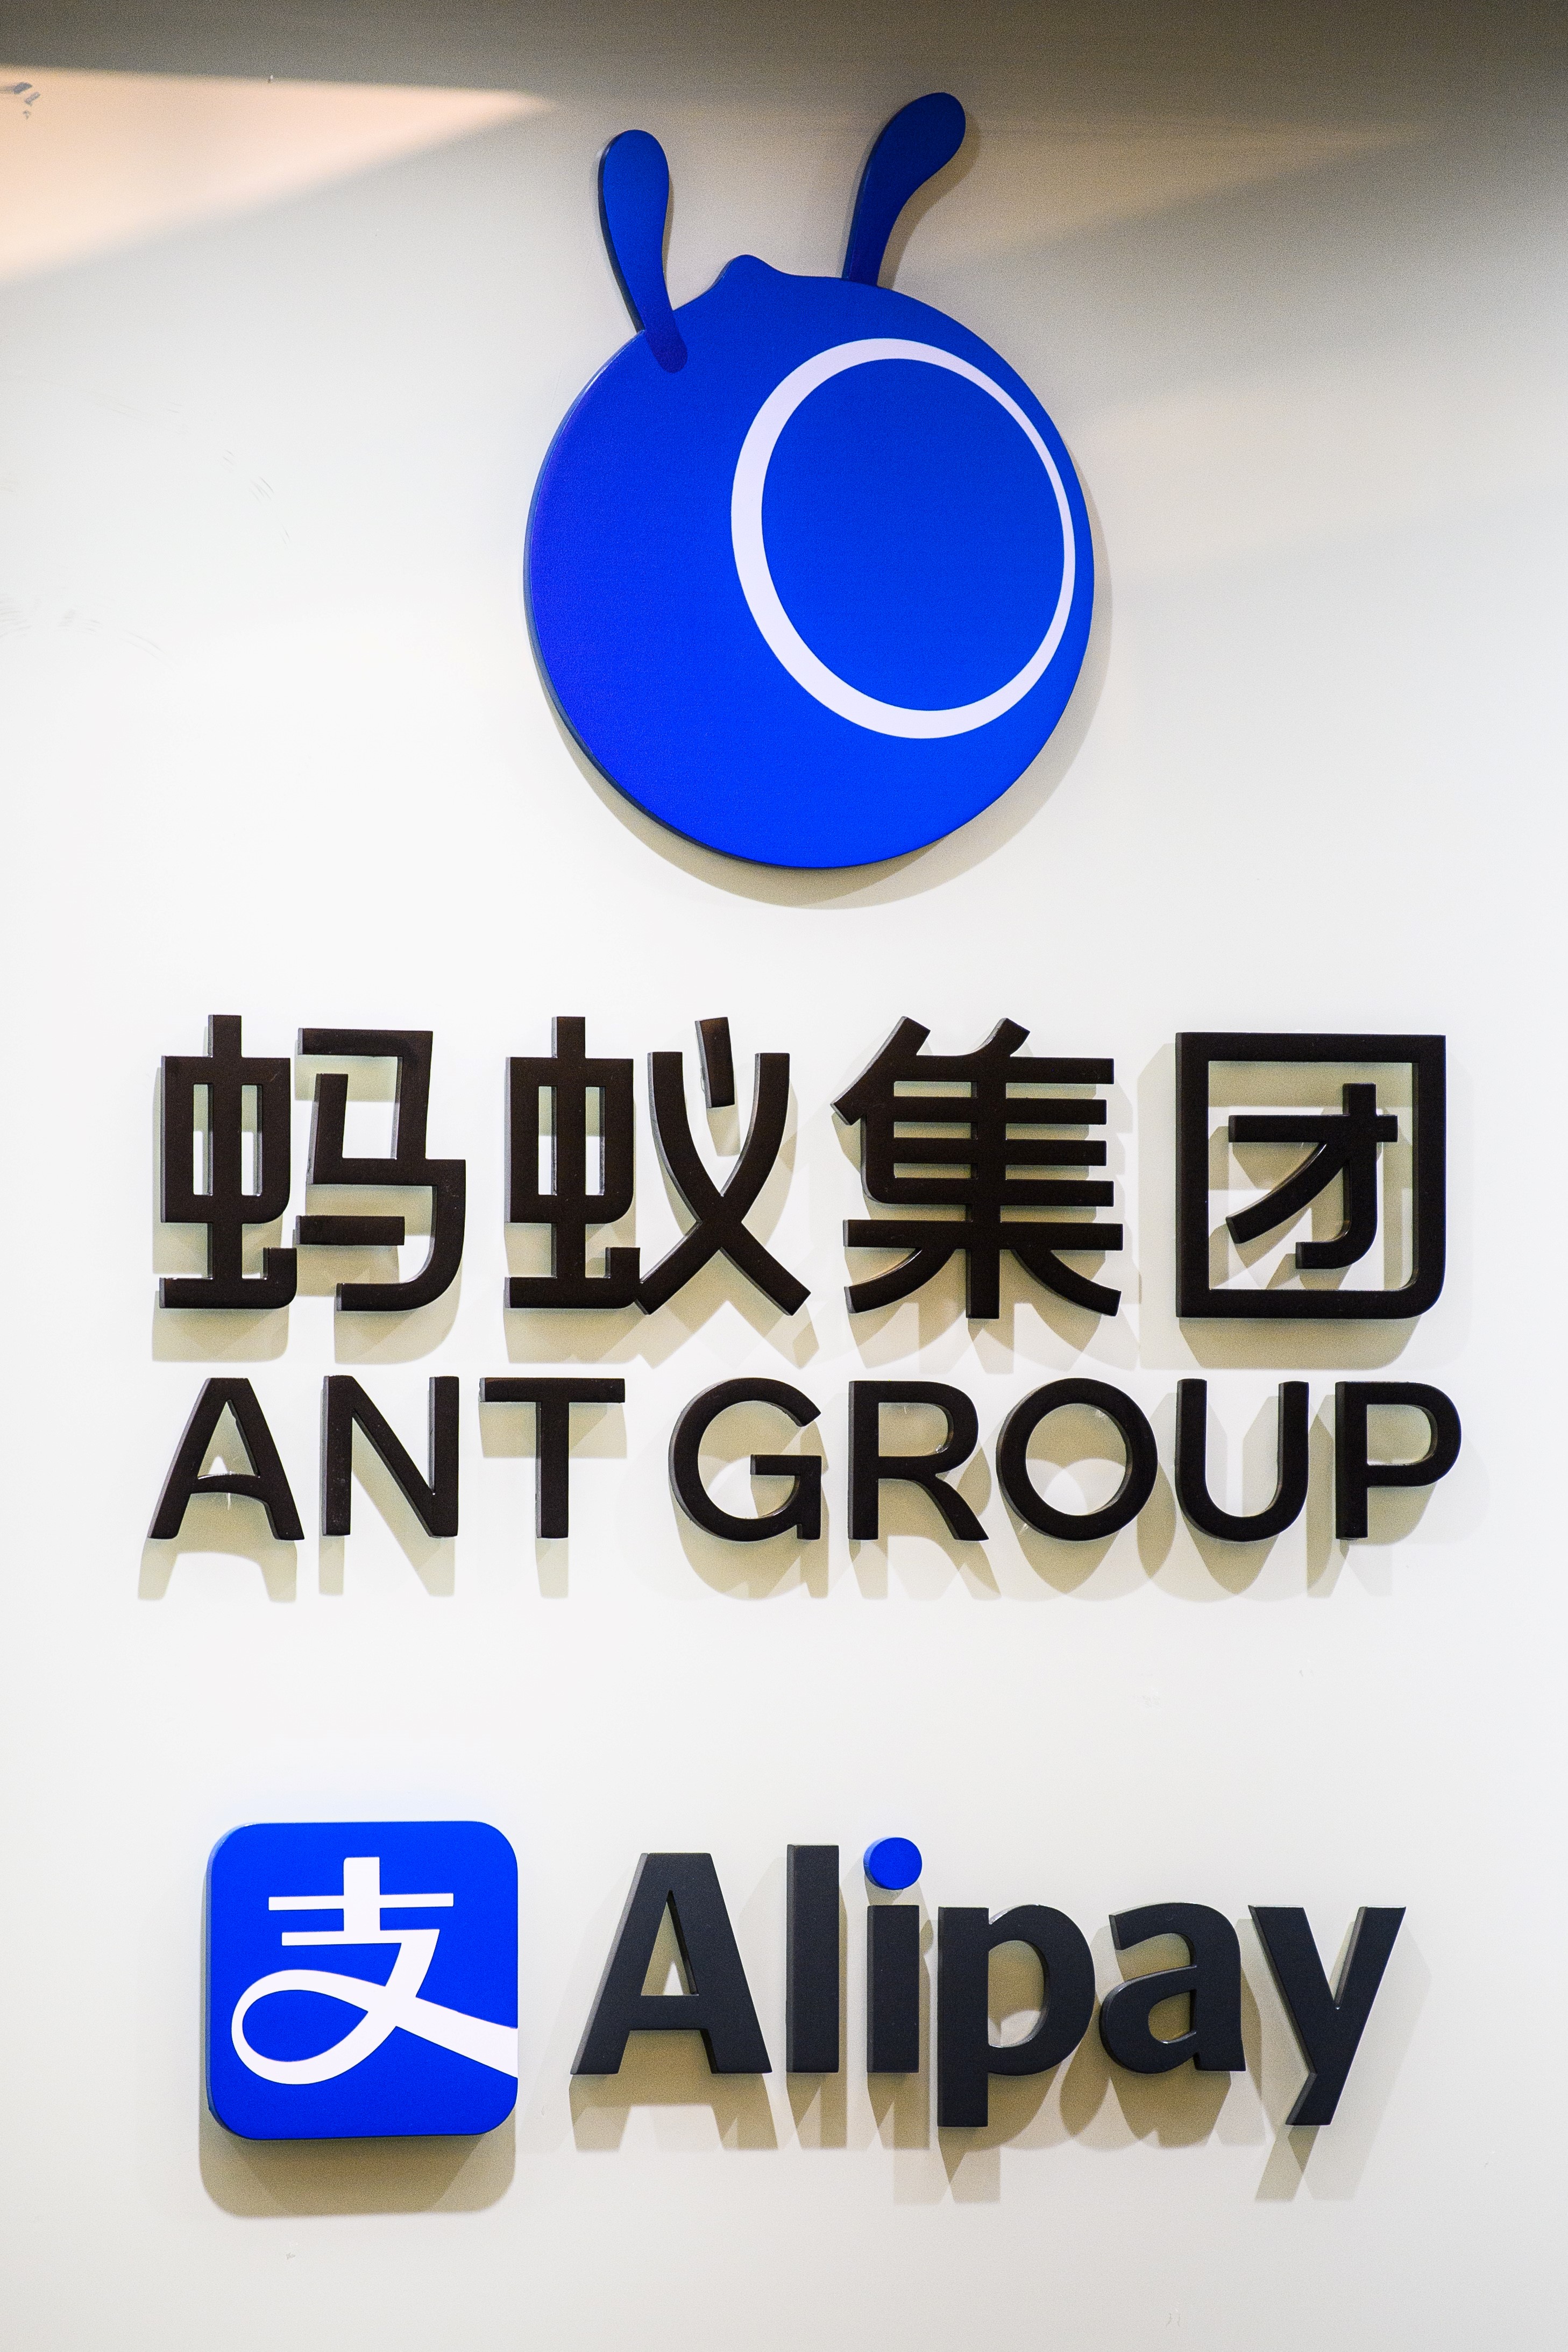 Logo của Ant Group. (Ảnh ANTHONY WALLACE / AFP qua Getty Images)